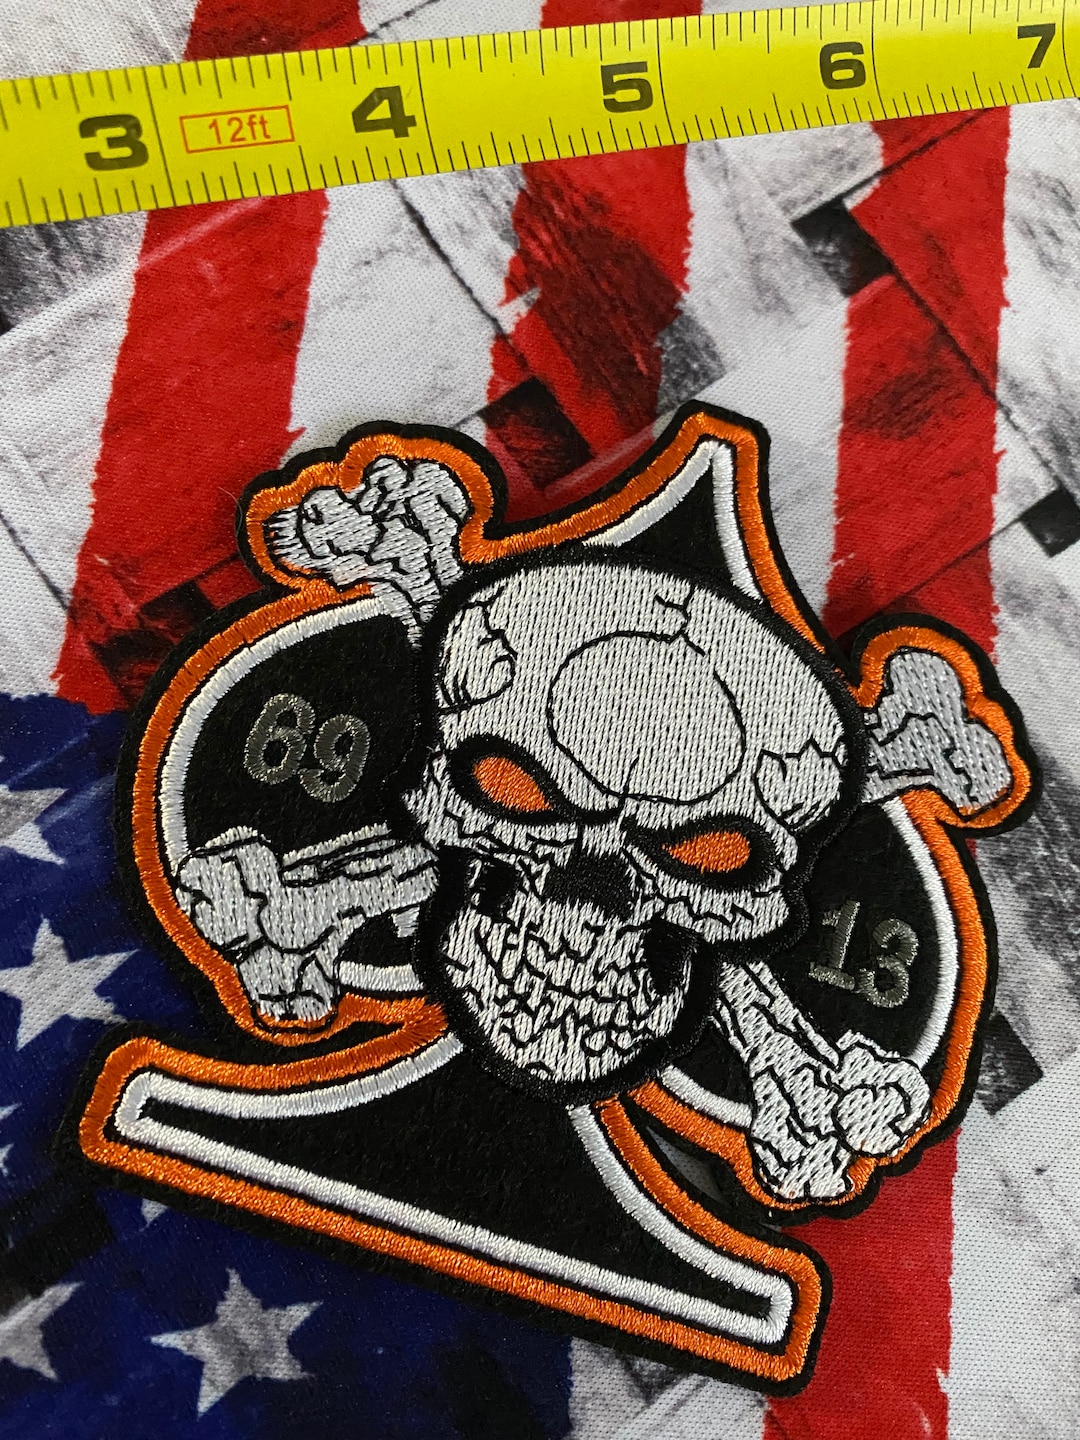 Large Iron On Patch • Embroidered Patch • Custom - Cloths - Punk - Vintage  • 1x Patch • Orange Spades